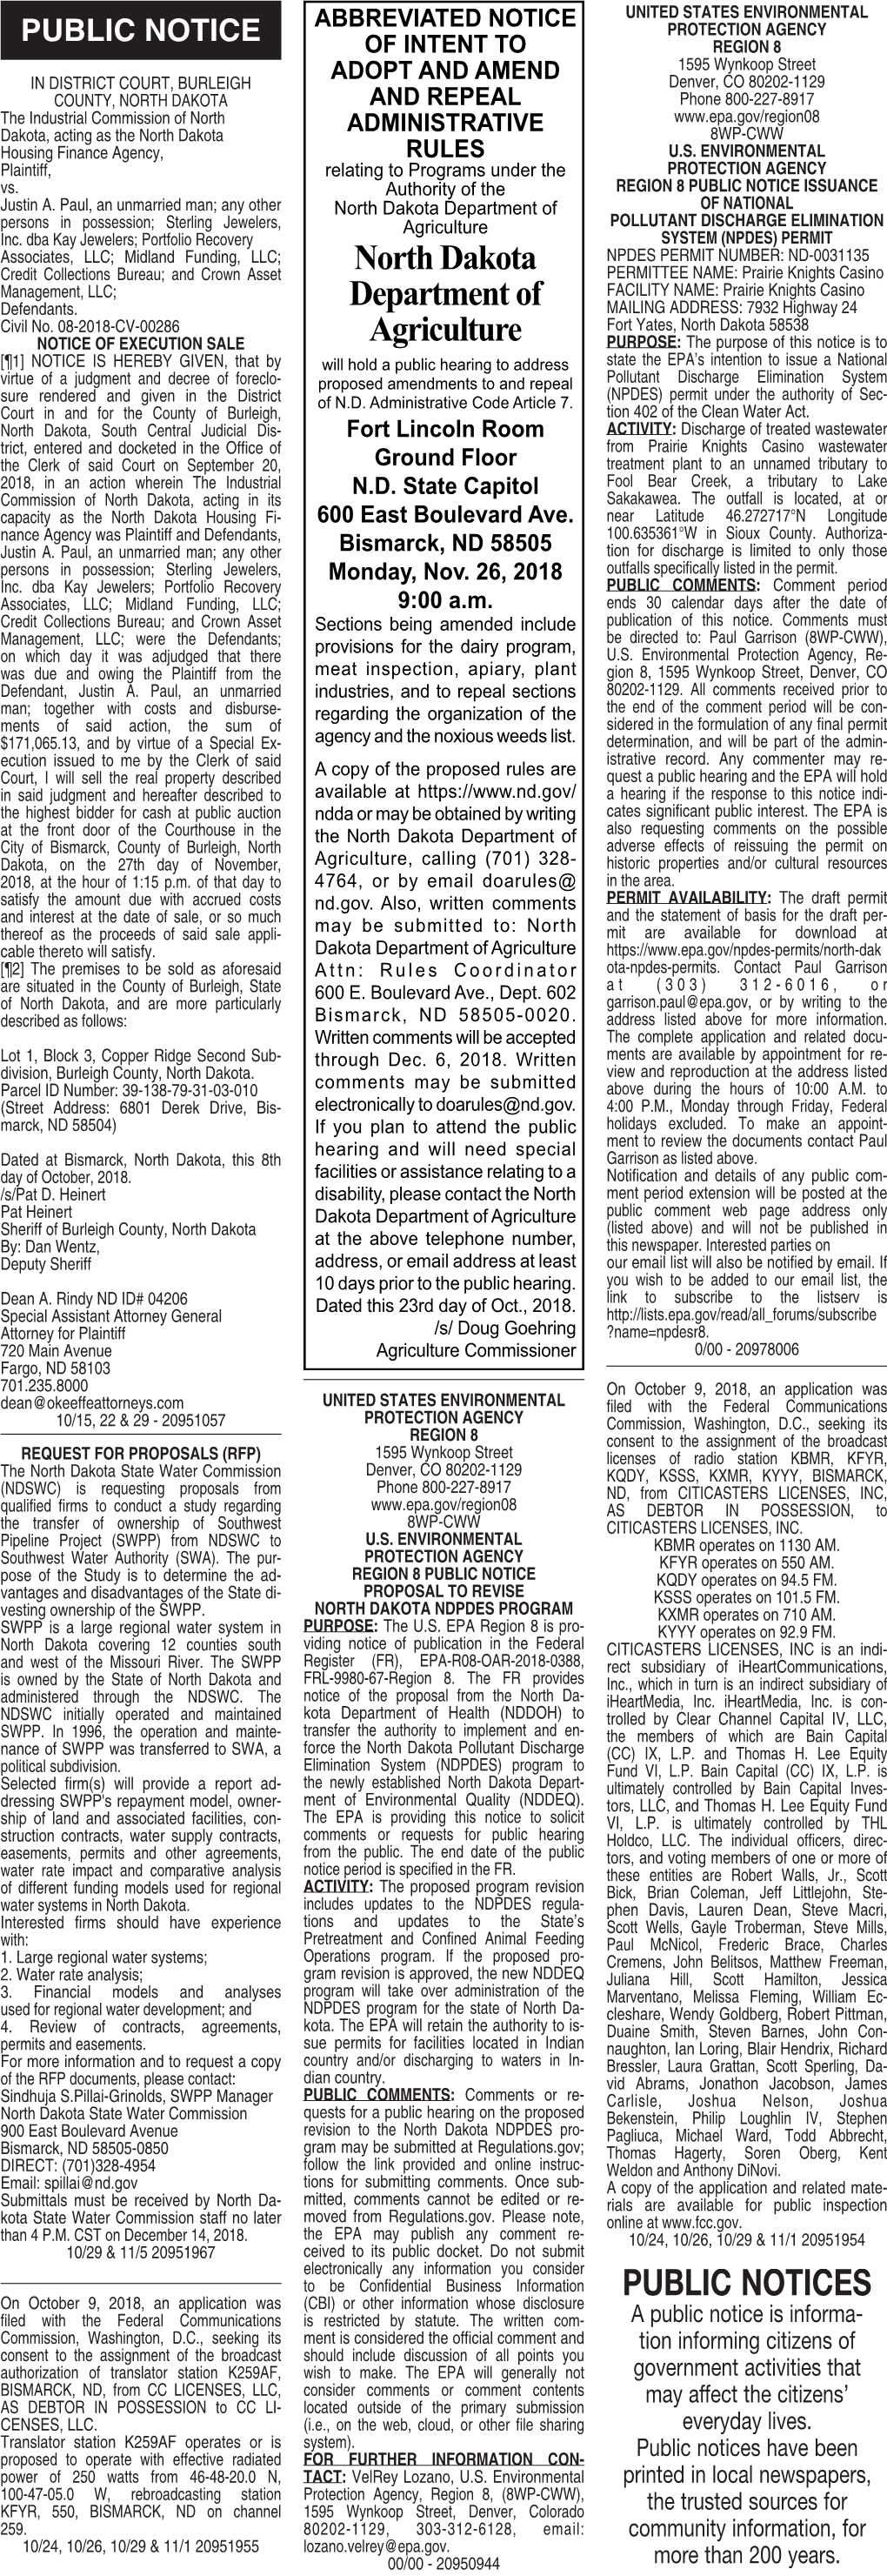 PUBLIC NOTICES on October 9, 2018, an Application Was (CBI) Or Other Information Whose Disclosure Filed with the Federal Communications Is Restricted by Statute